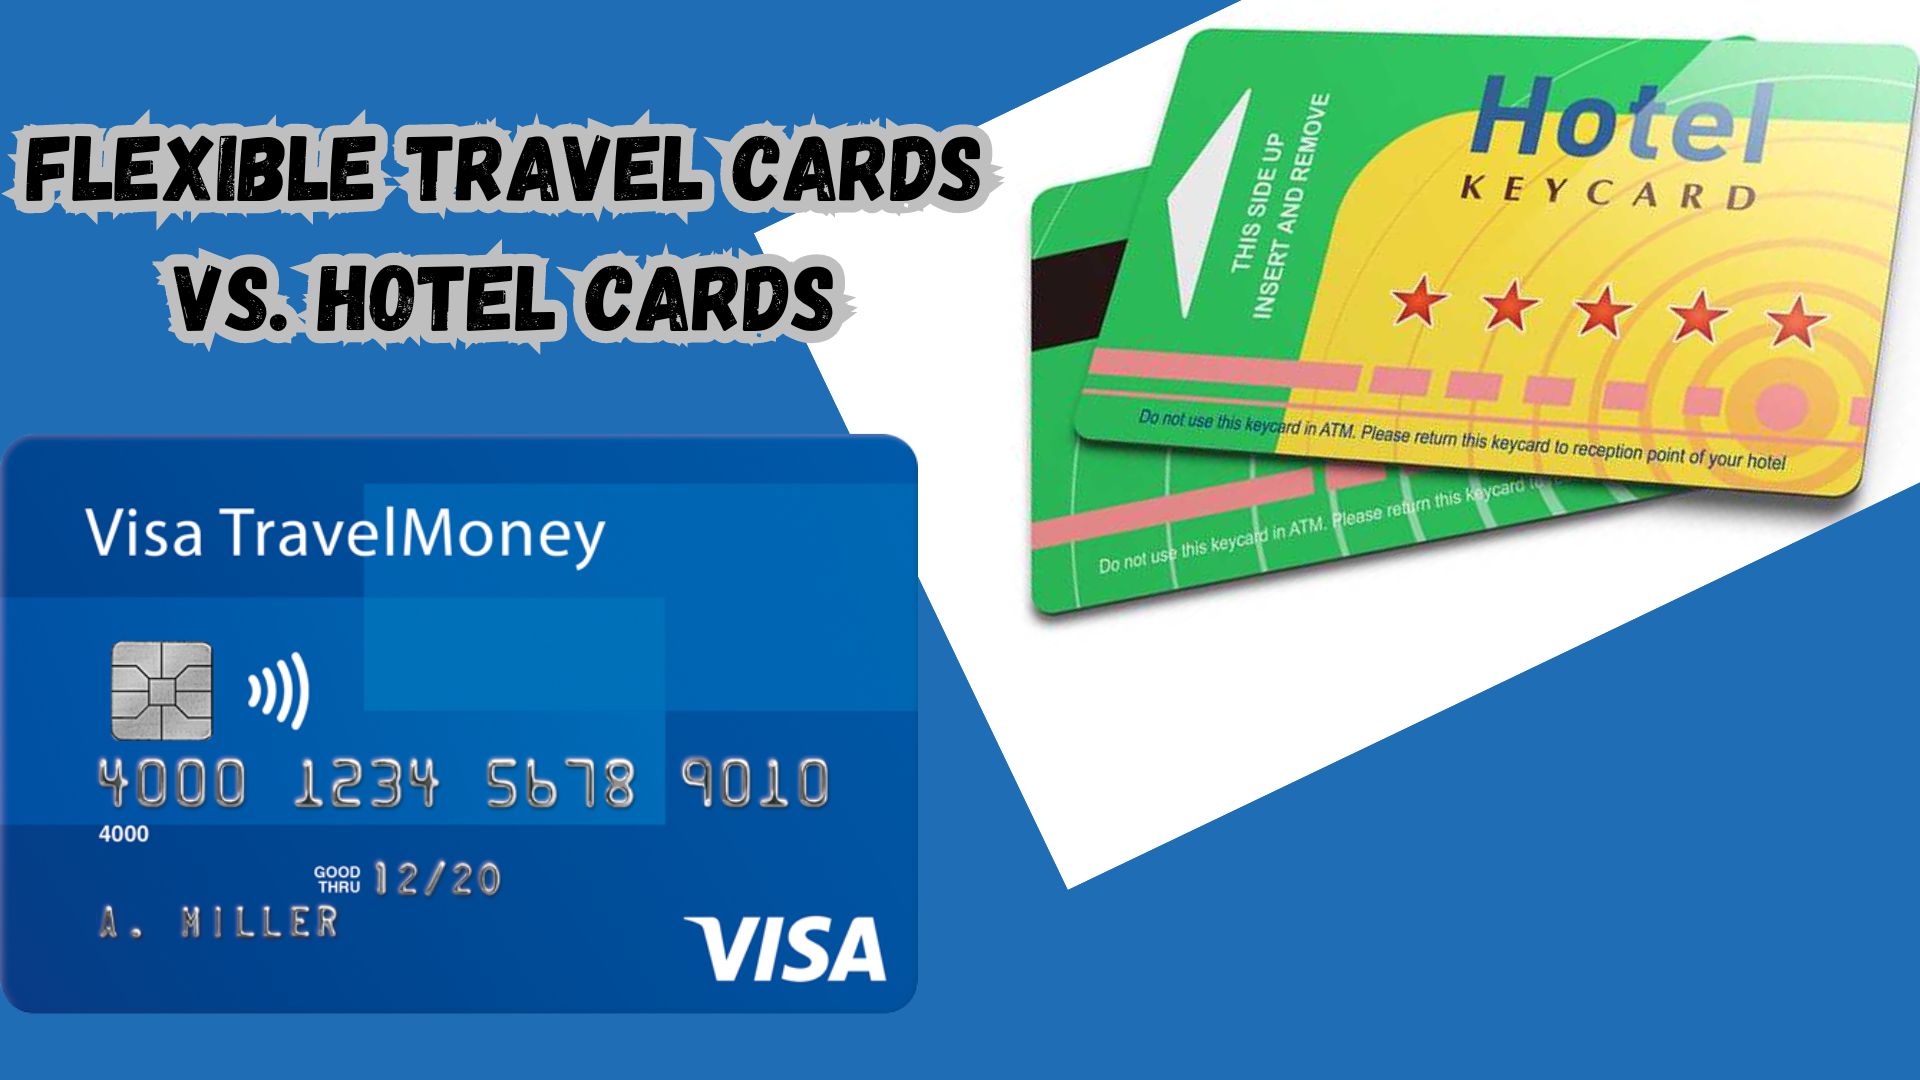 Flexible Travel Cards vs. Hotel Cards.